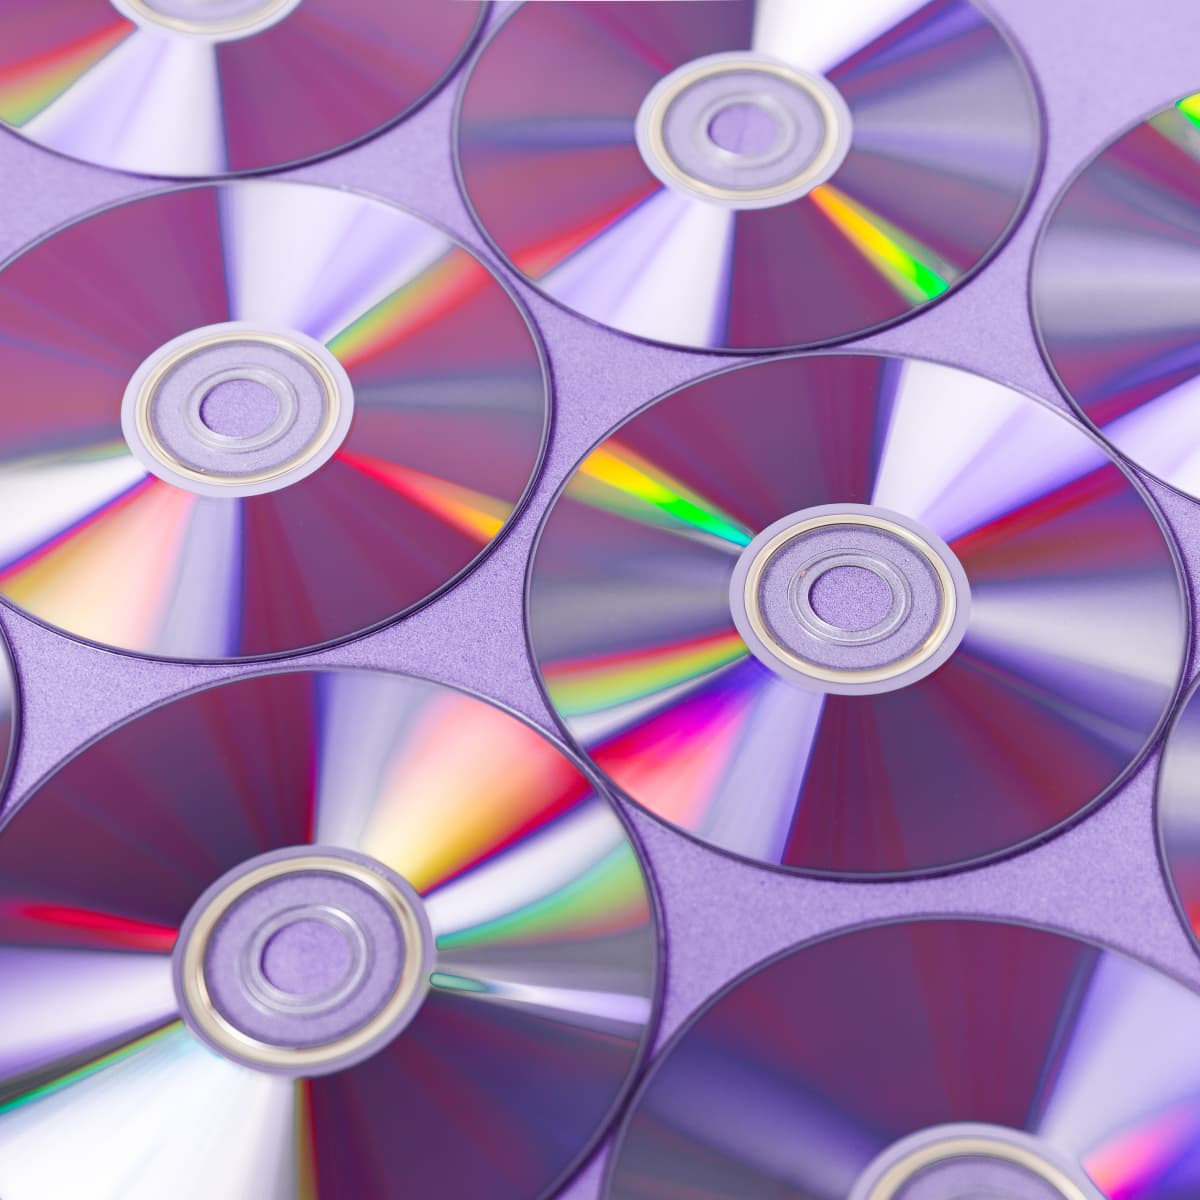 How the compact disc lost its shine, Music